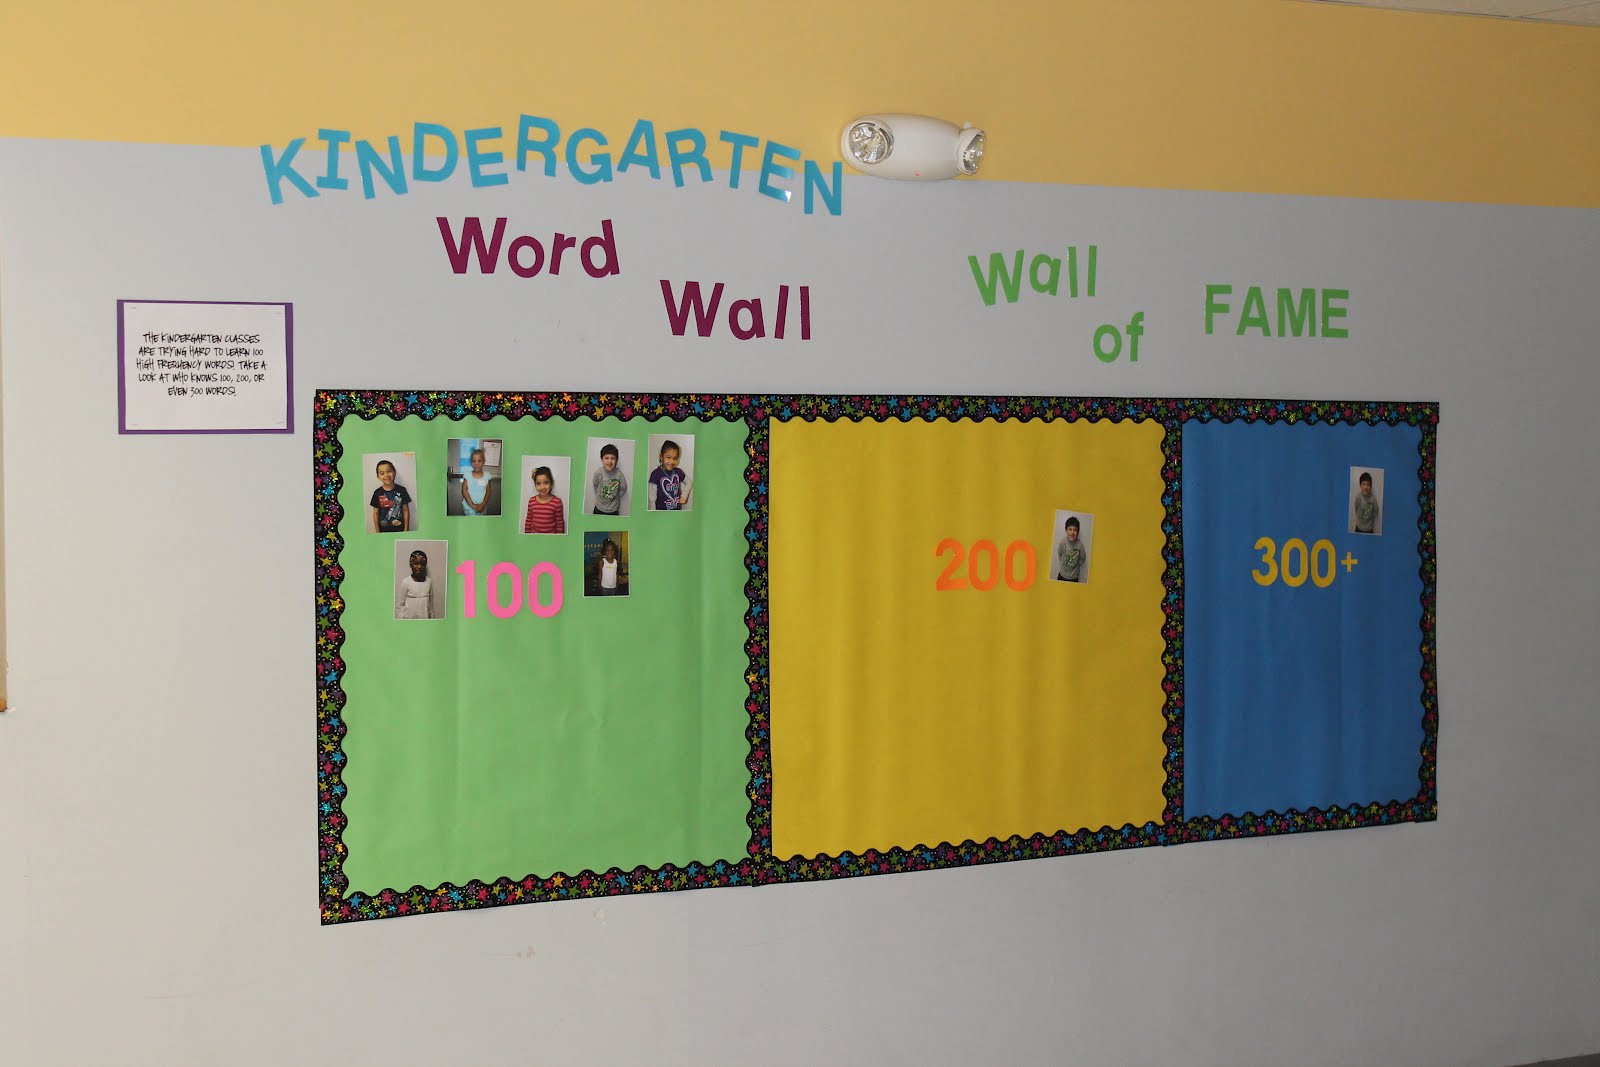 More less wordwall. Word Wall. Wall of Fame. Wordwall 7. Wall of Fame in English class.